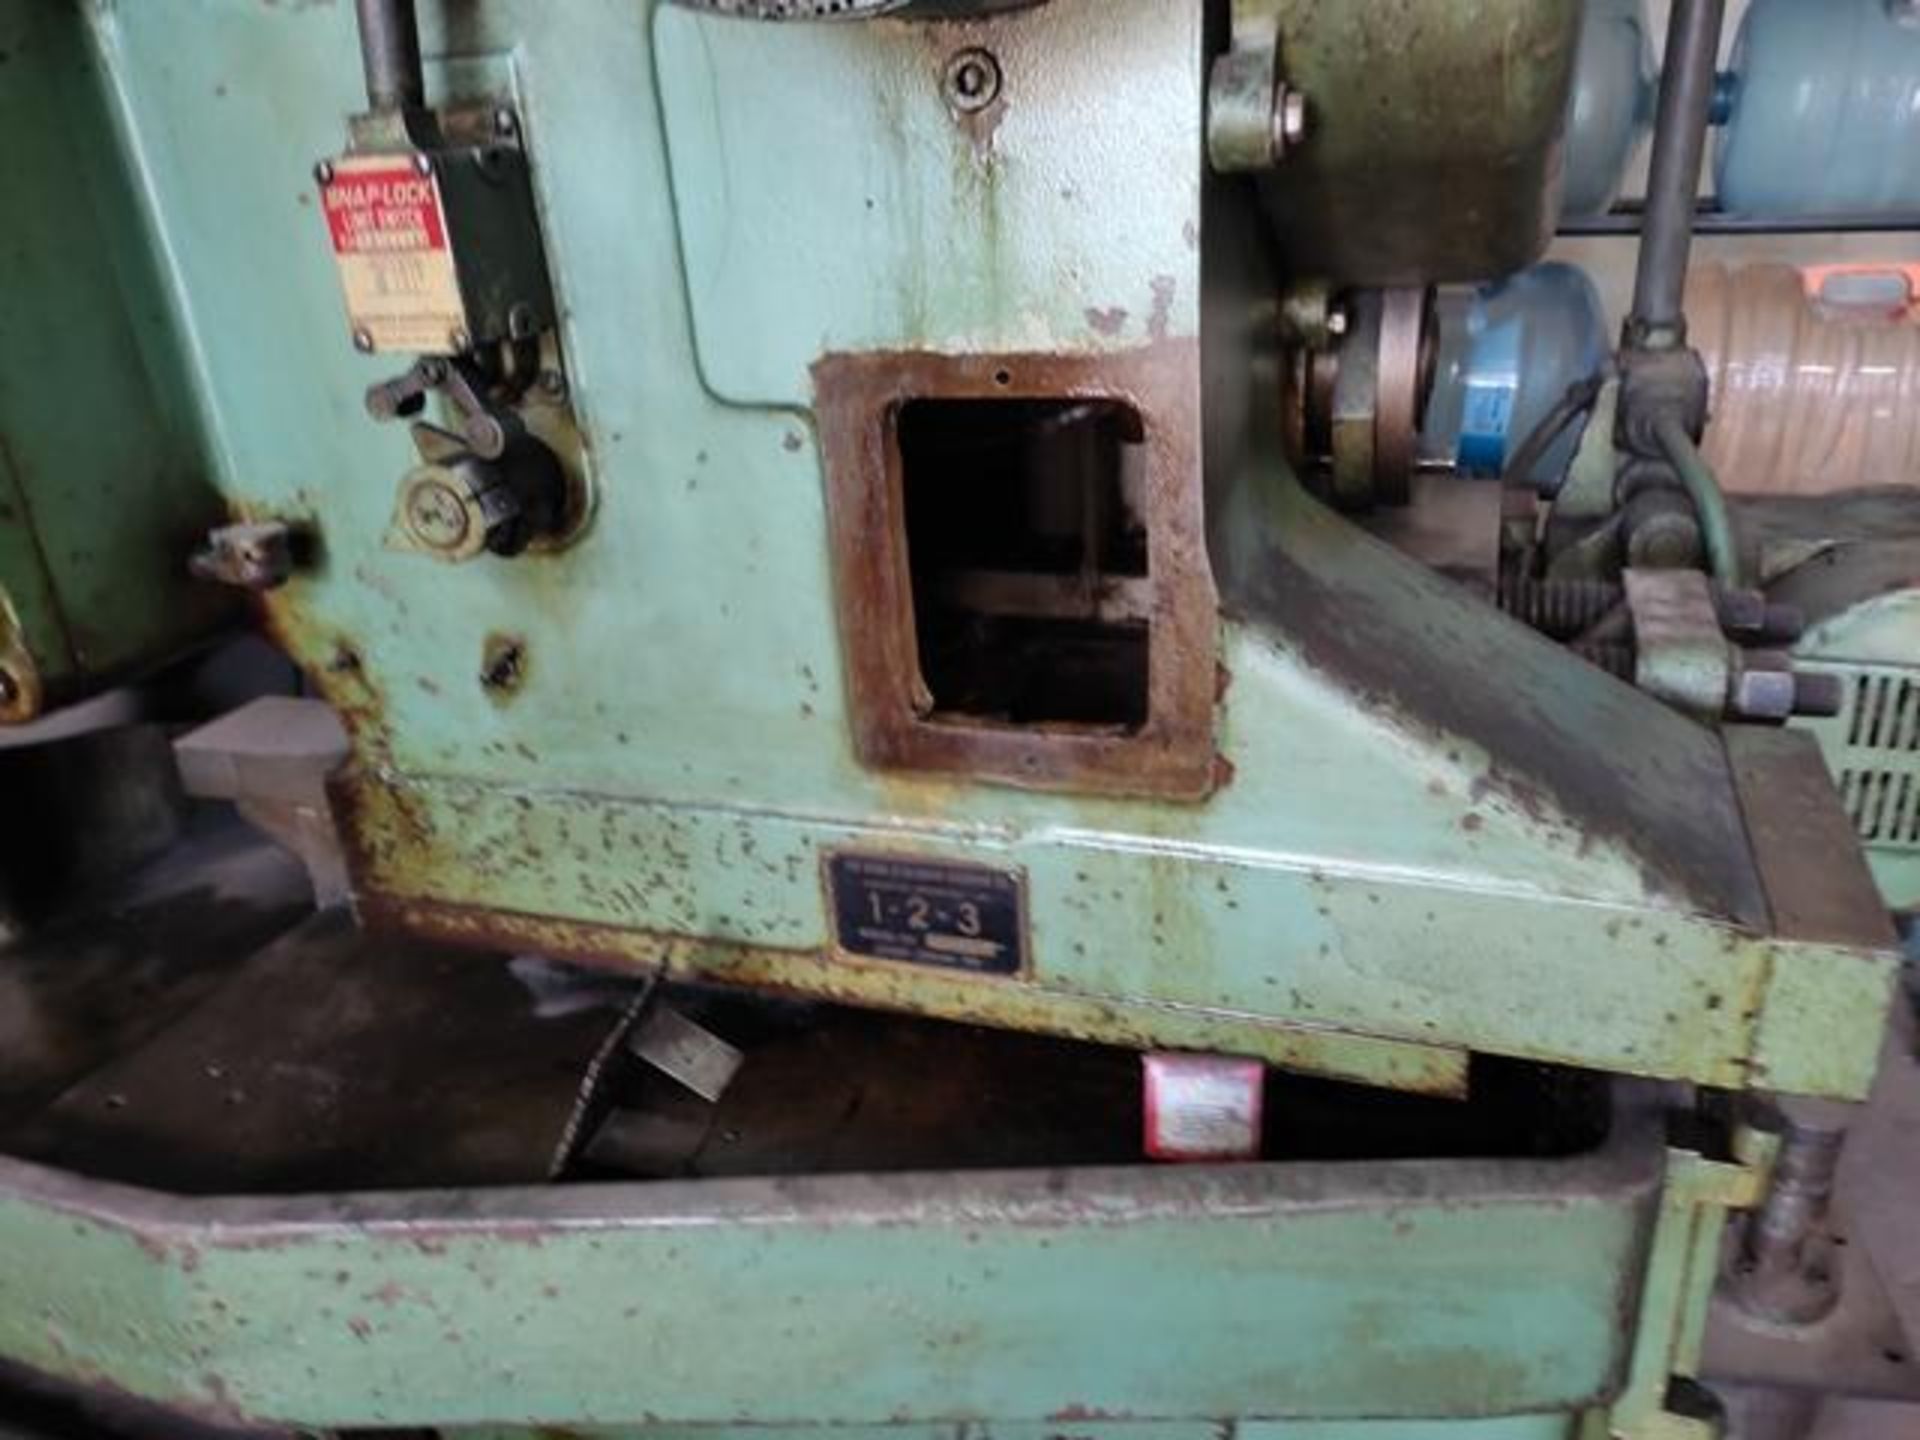 Goss 1-2-3 Chucking Machine, Serial: 2317: 7 Spindle, 3-1/2” Diameter, 4 Chucking Positions with - Image 15 of 26